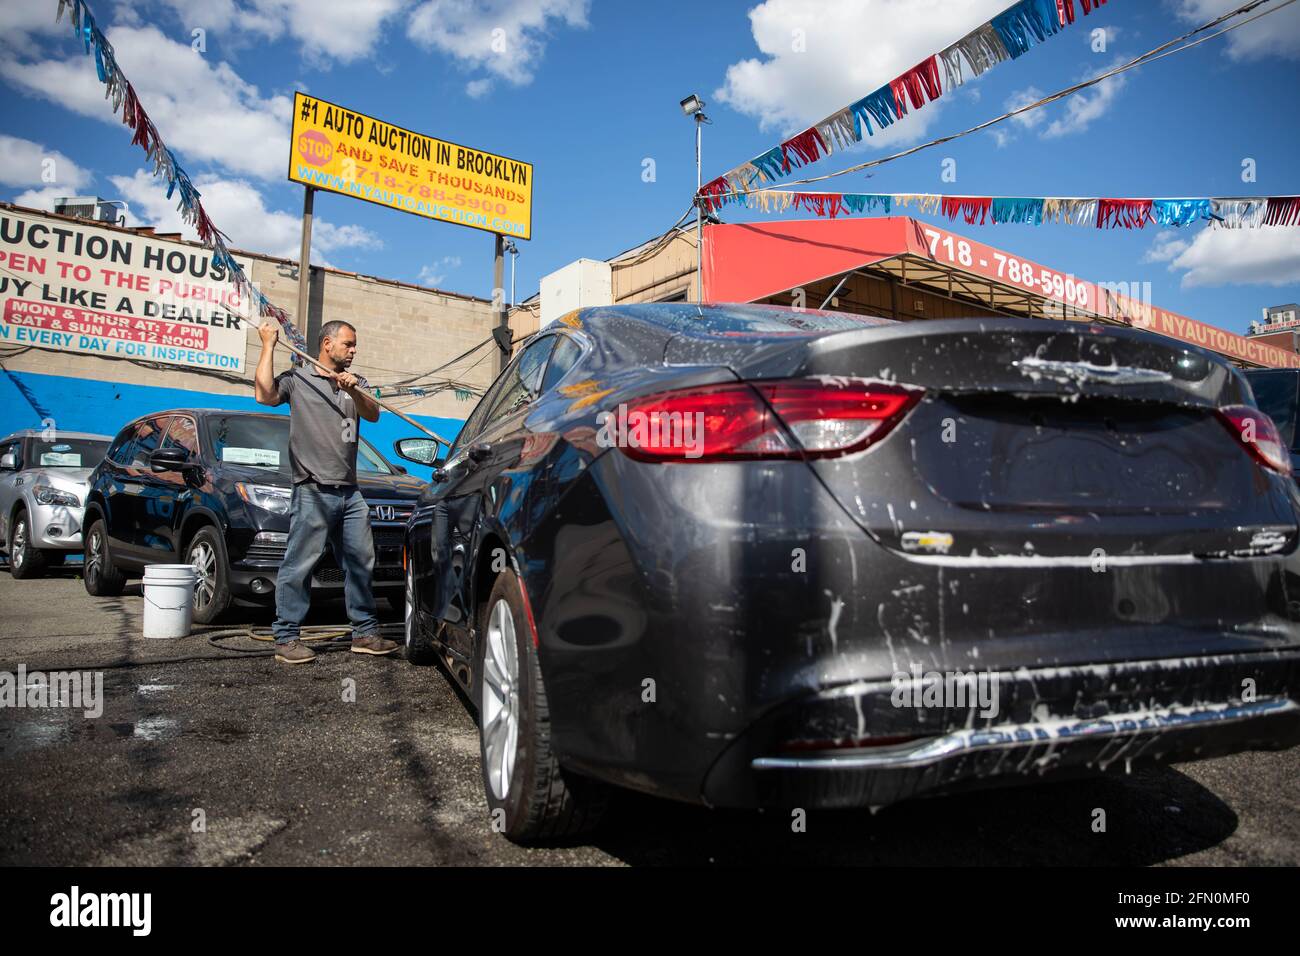 New York, USA. 12th May, 2021. A worker washes a car at Hamilton Avenue Auto Sales, a used car dealership in the Brooklyn borough of New York, the United States, on May 12, 2021. U.S. consumer prices rose 0.8 percent in April, with a 12-month increase of 4.2 percent, the U.S. Labor Department reported Wednesday. This marked the largest 12-month growth since a 4.9-percent increase for the period ending September 2008, according to the report. Credit: Michael Nagle/Xinhua/Alamy Live News Stock Photo